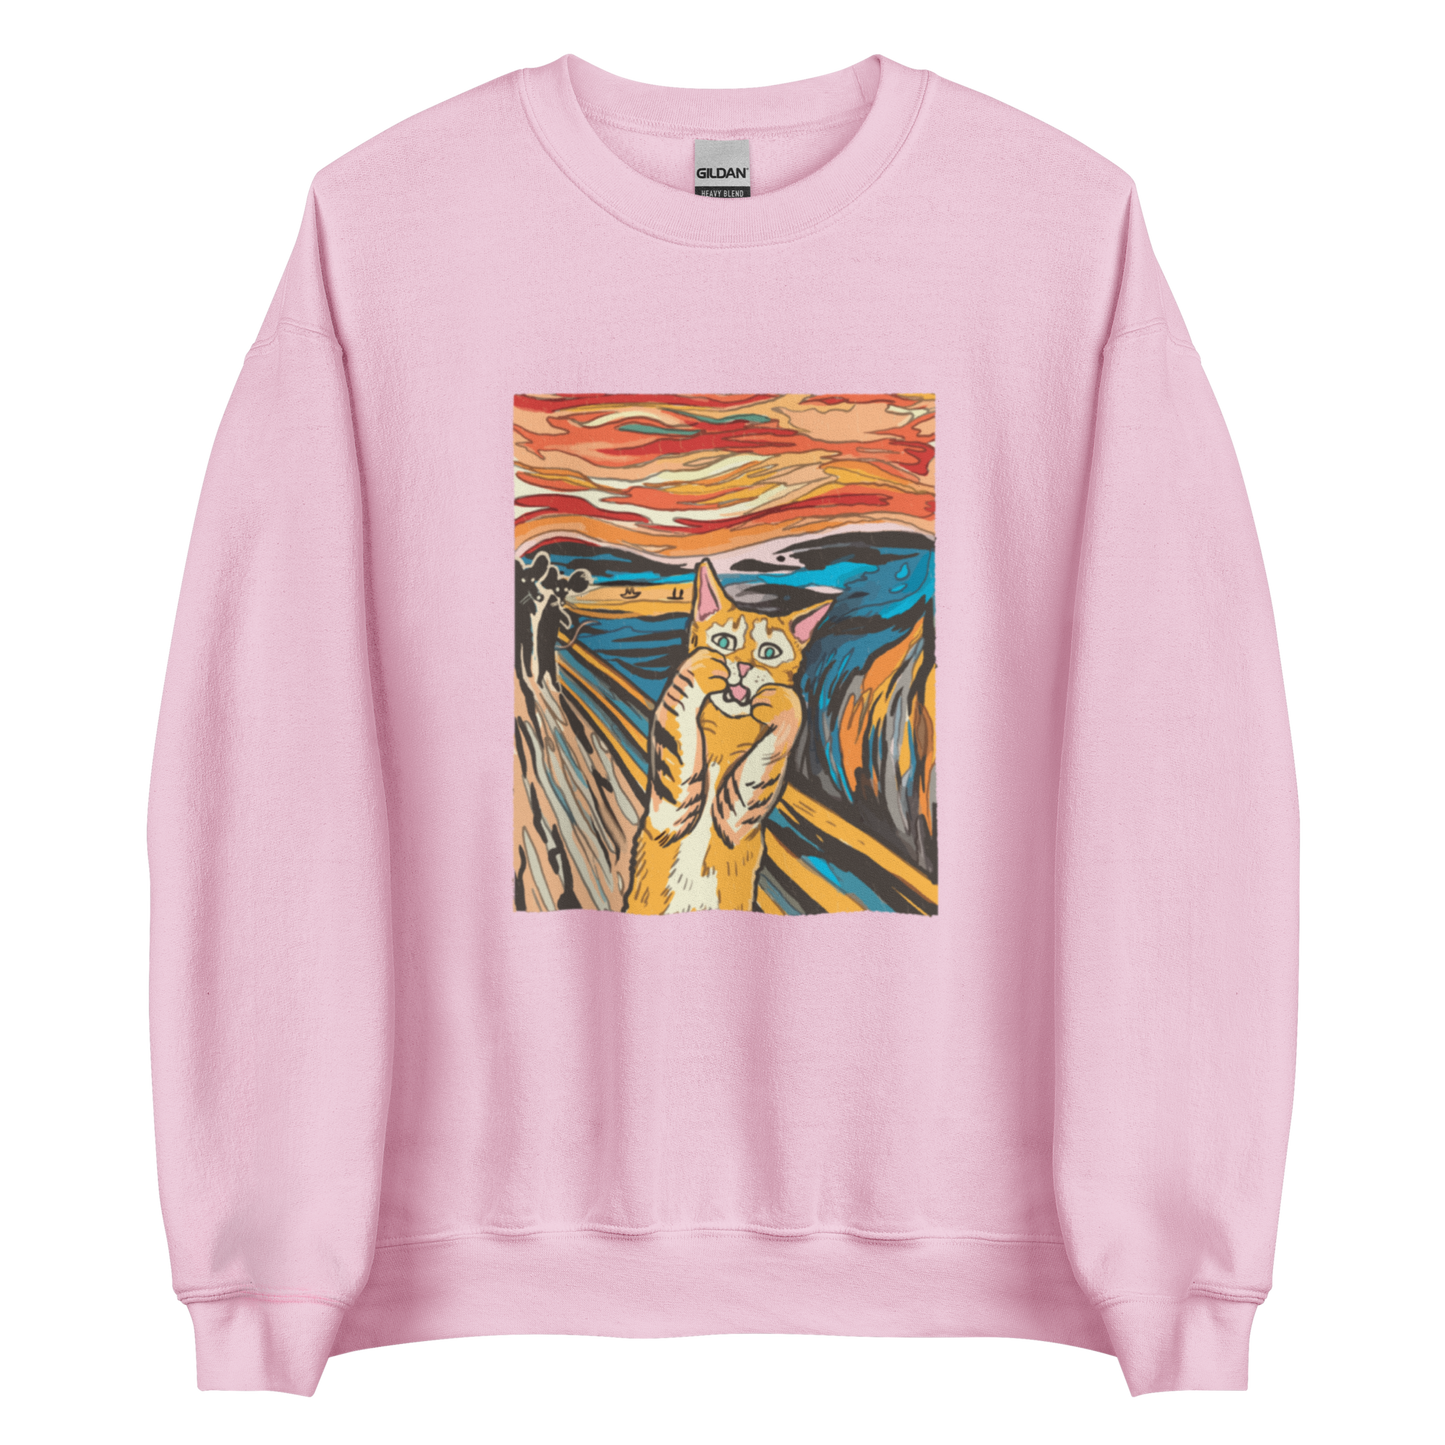 Light Pink Screaming Cat Sweatshirt featuring an Edvard Munch's 'The Scream' graphic on the chest - Funny Graphic Cat Sweatshirts - Boozy Fox